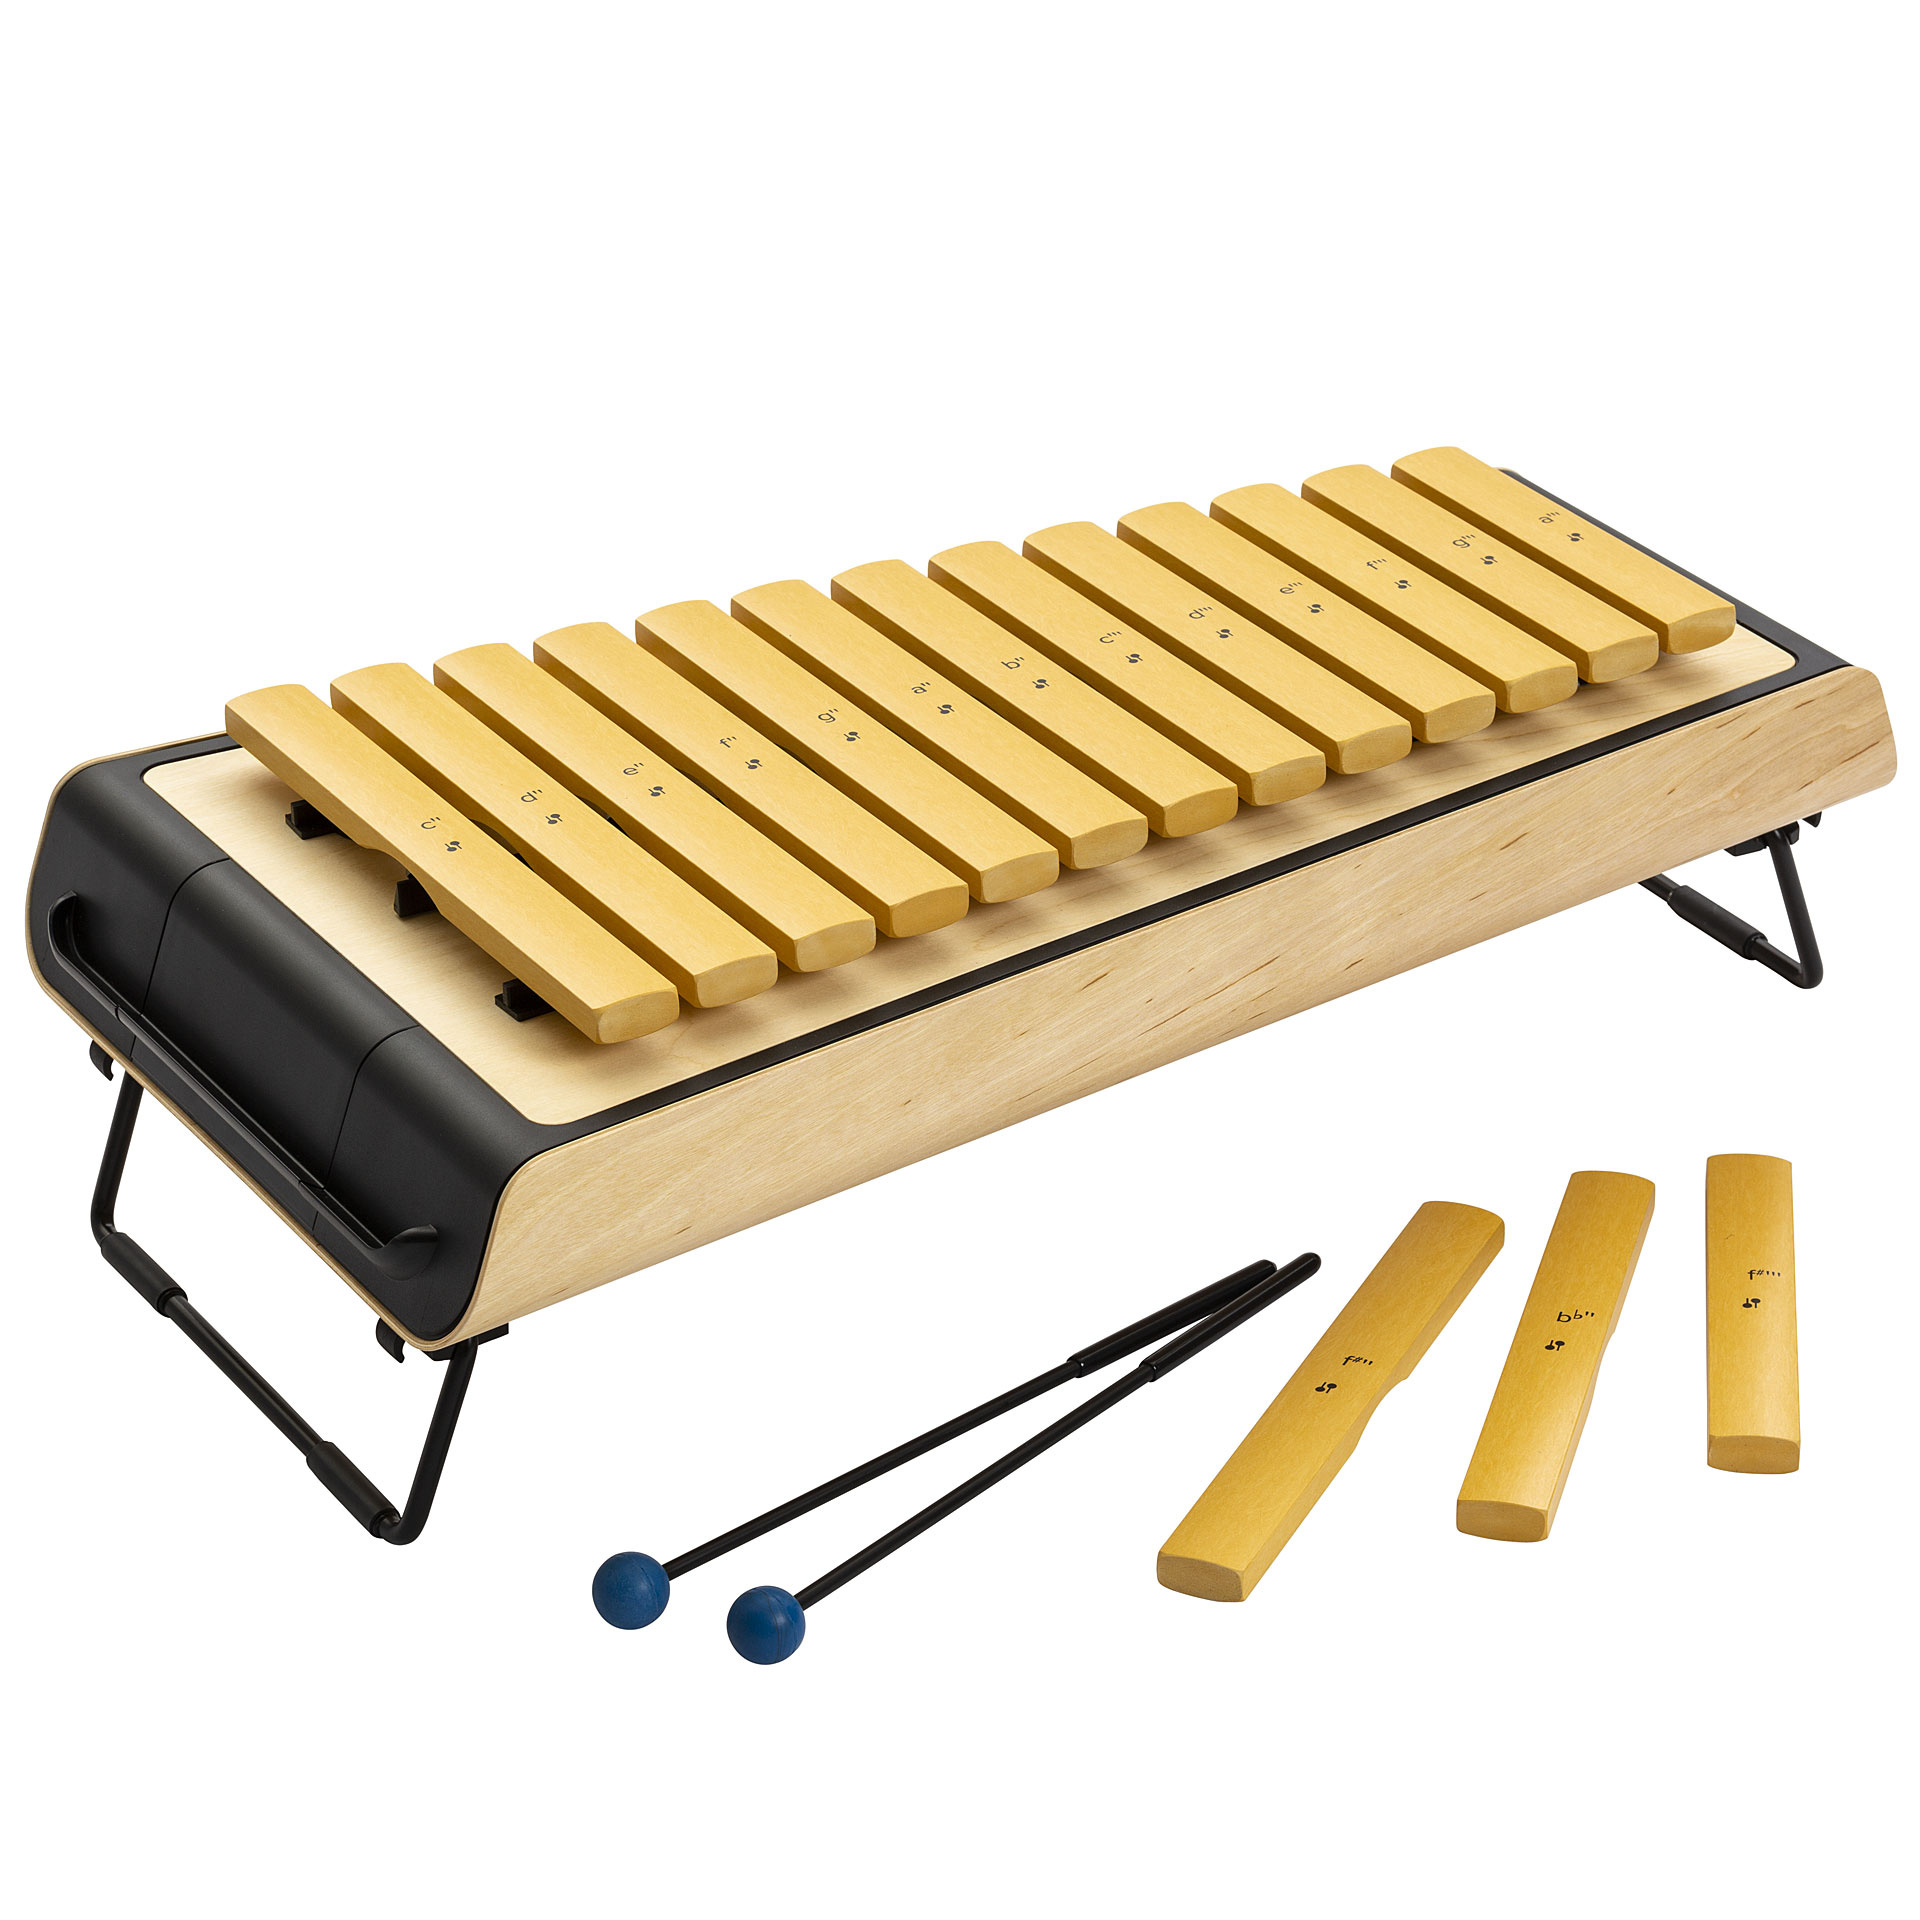 Xylophone: Soprano Type, A Set Of Tuned Keys Arranged In The Fashion Of A Piano. 1920x1920 HD Background.